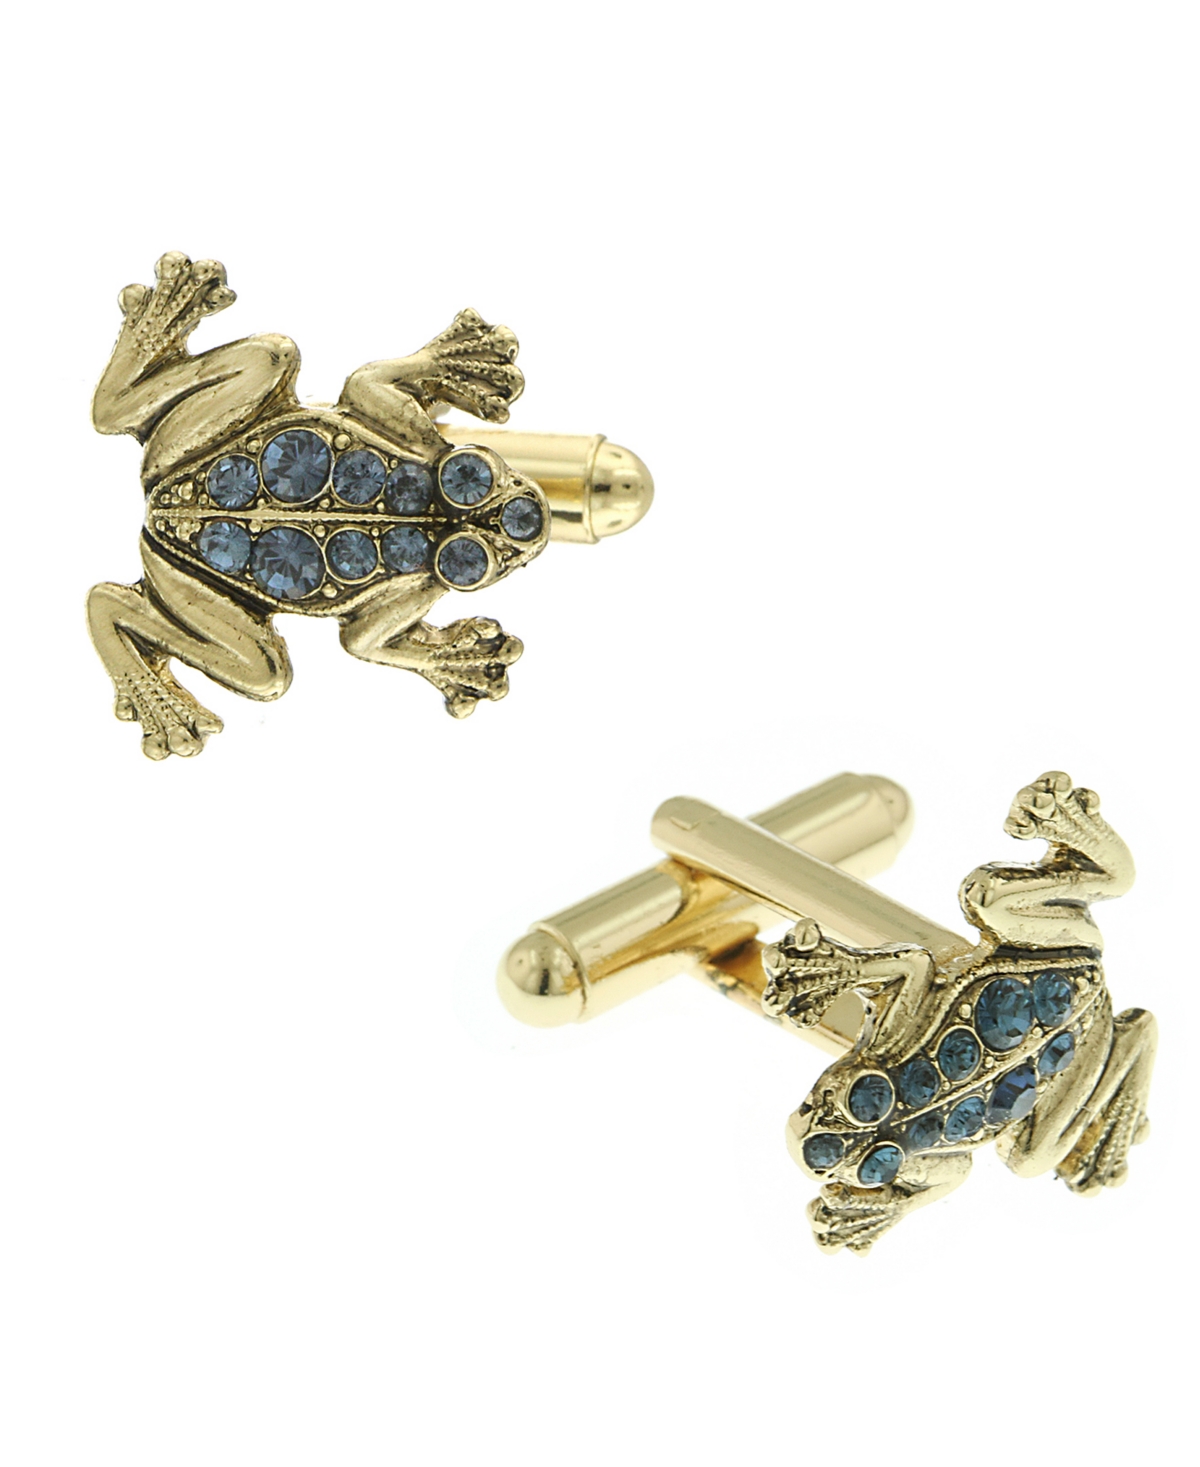 Jewelry 14K Gold Plated Crystal Frog Cufflinks - Blue